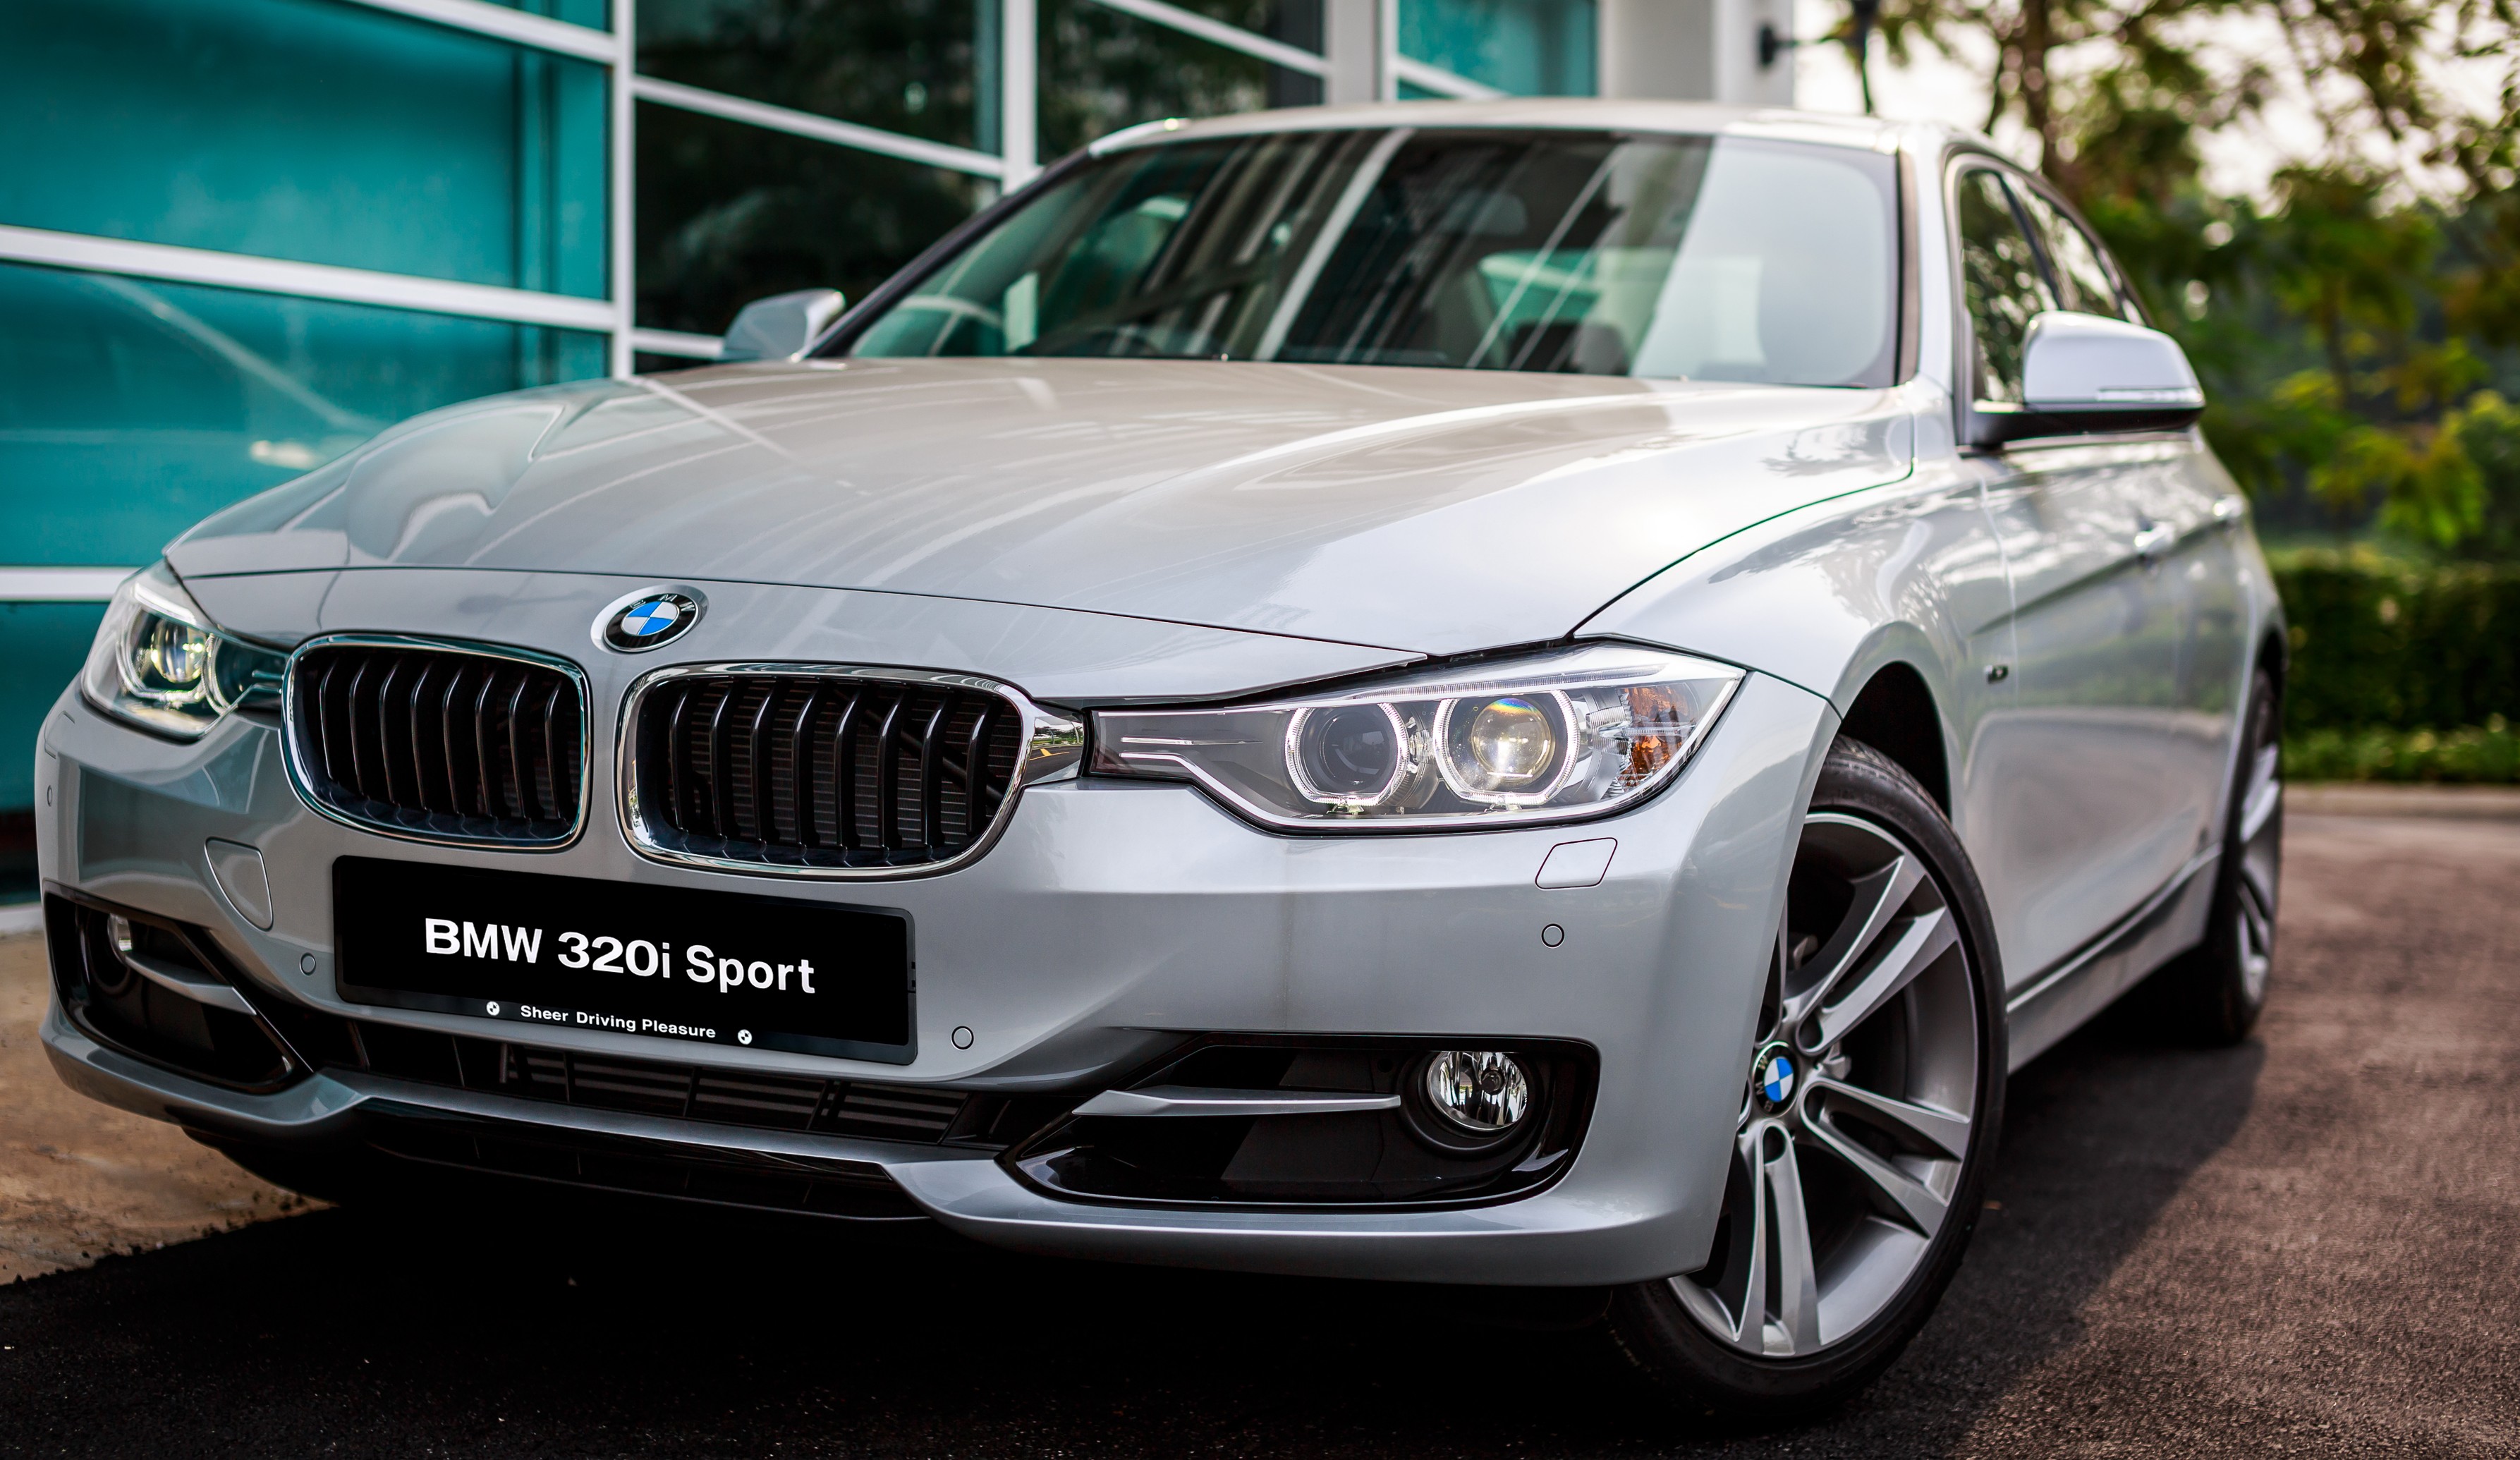  BMW 320i Sport  Edition now available RM259k The New BMW  